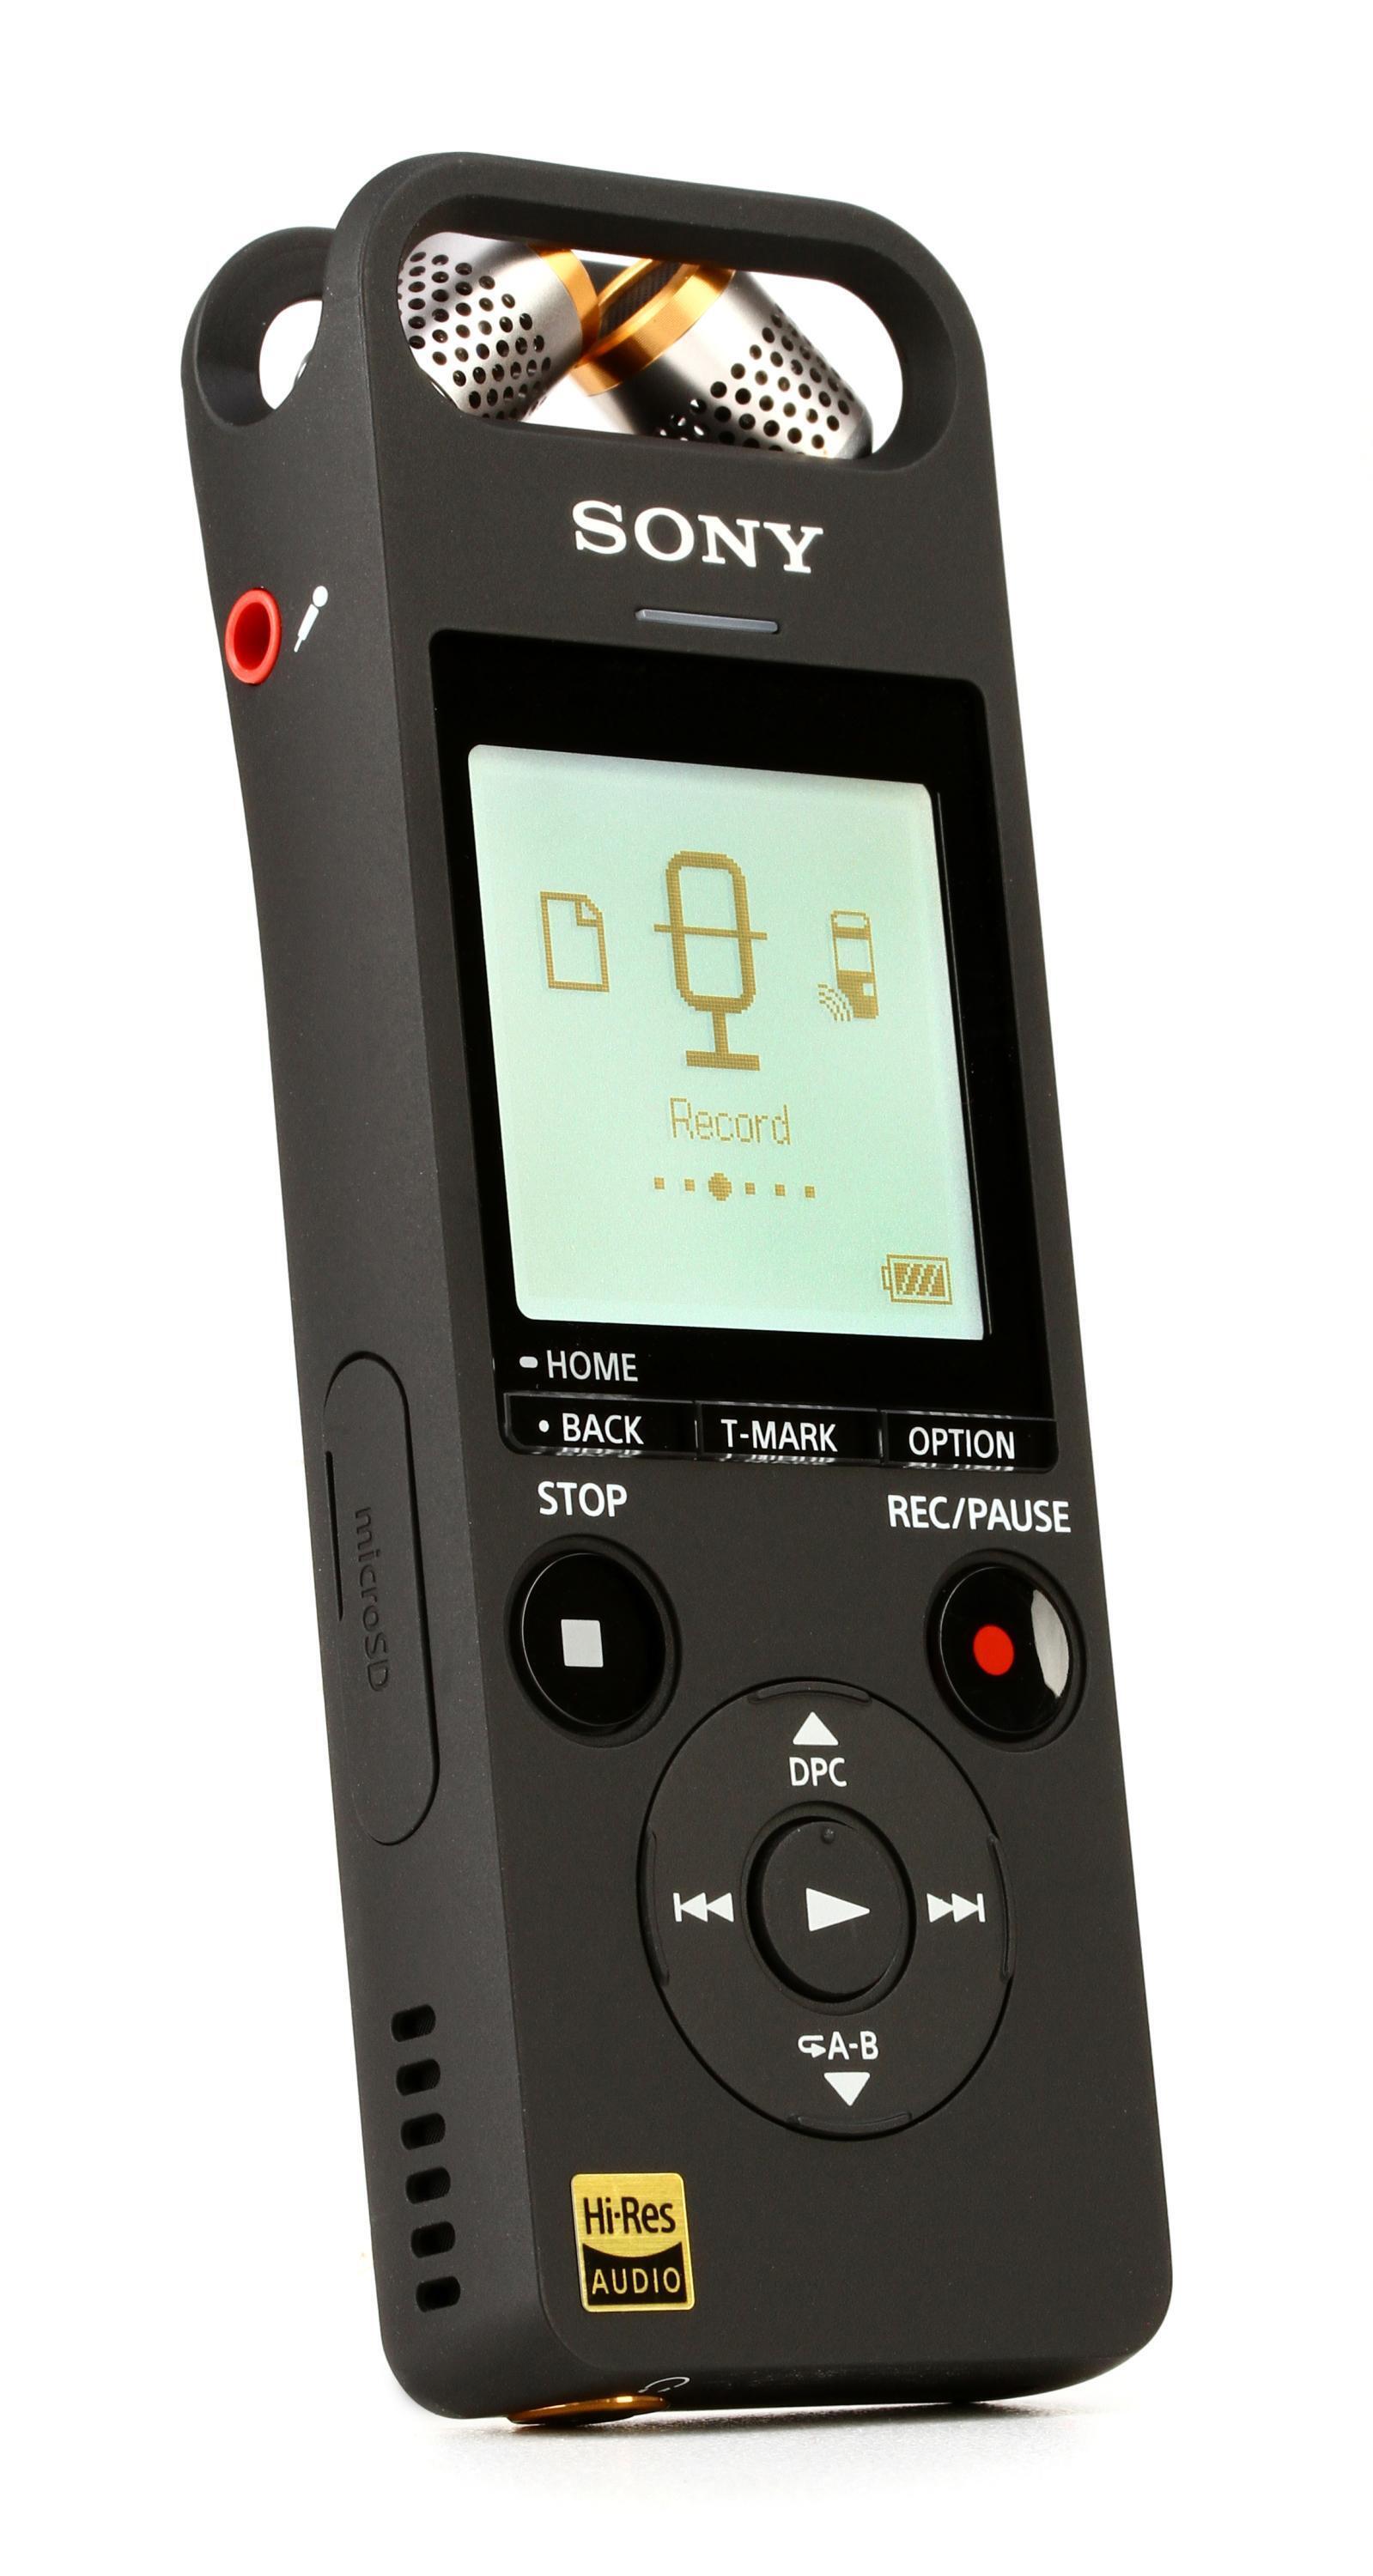 Sony ICDSX2000 Digital Voice Recorder with Bluetooth remote